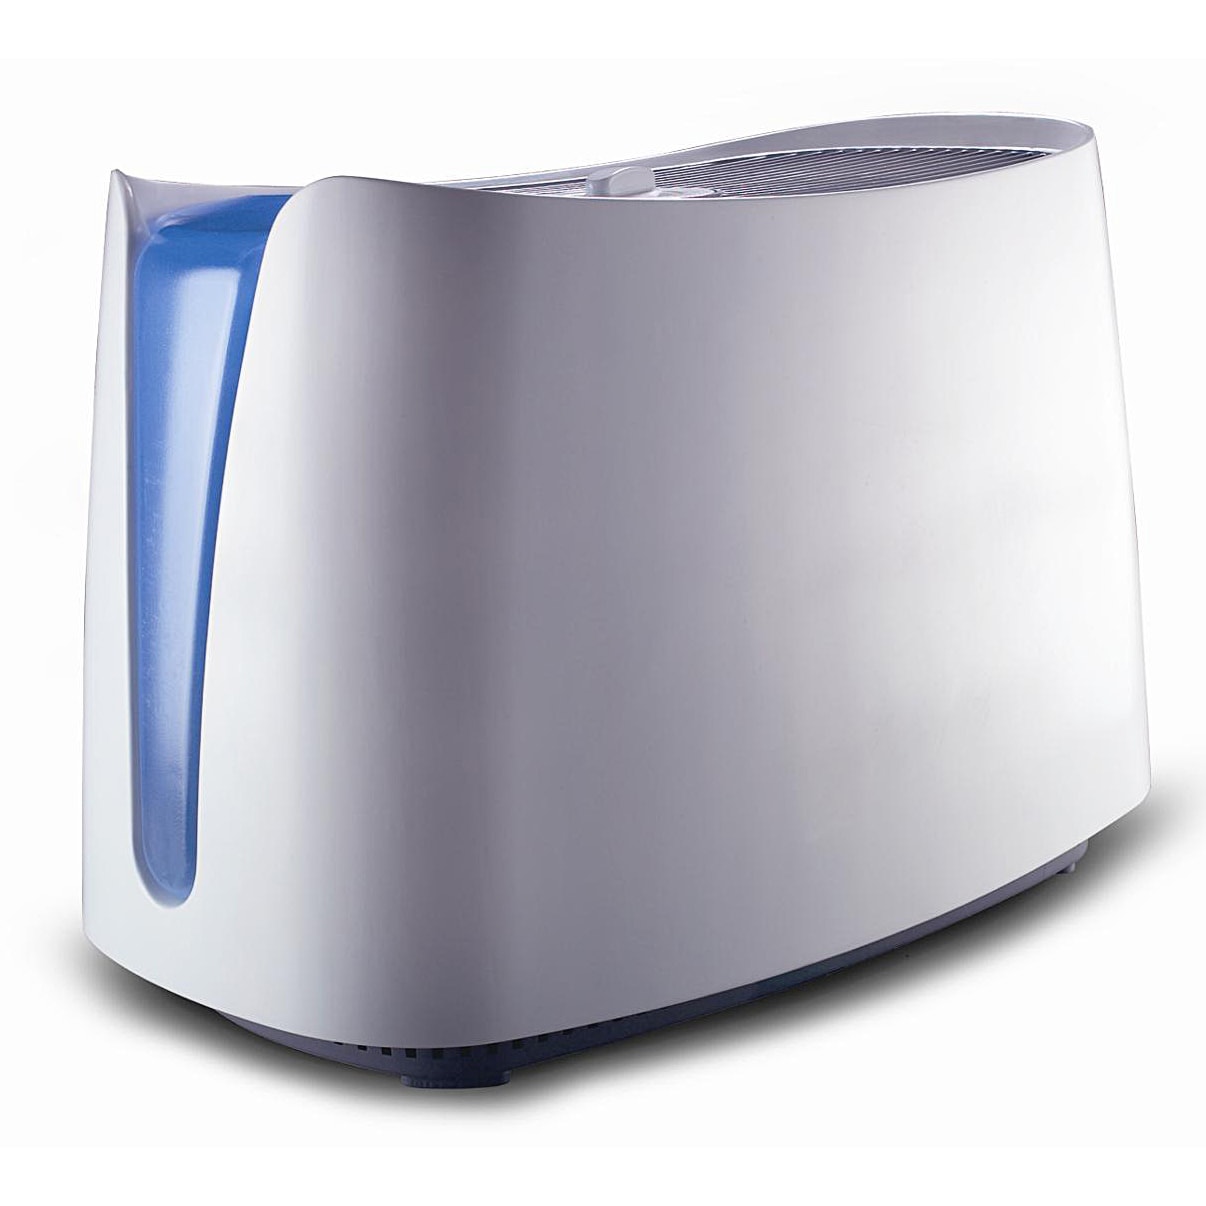 Honeywell Germ Free HCM-350 Humidifier - Free Shipping Today